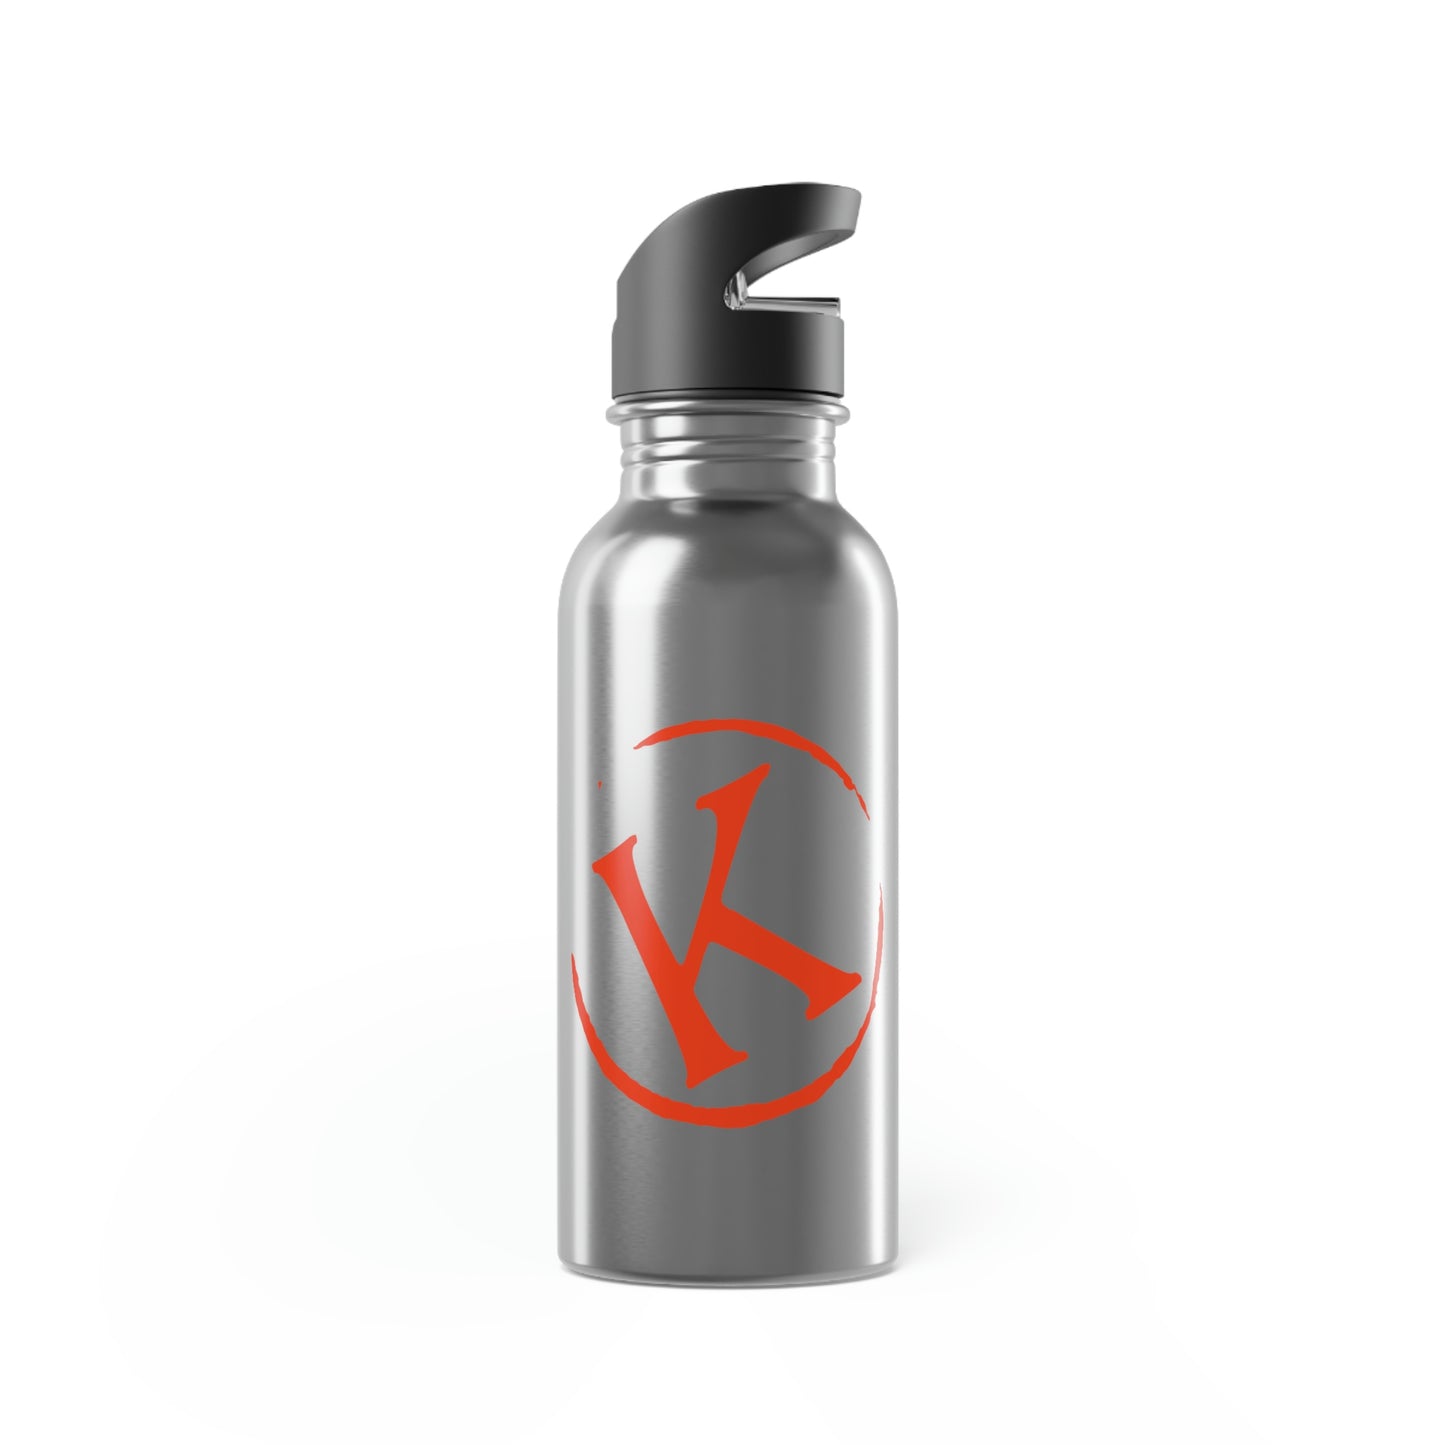 Branded K Stainless Steel Water Bottle With Straw, 20oz Oval logo #P15-03E